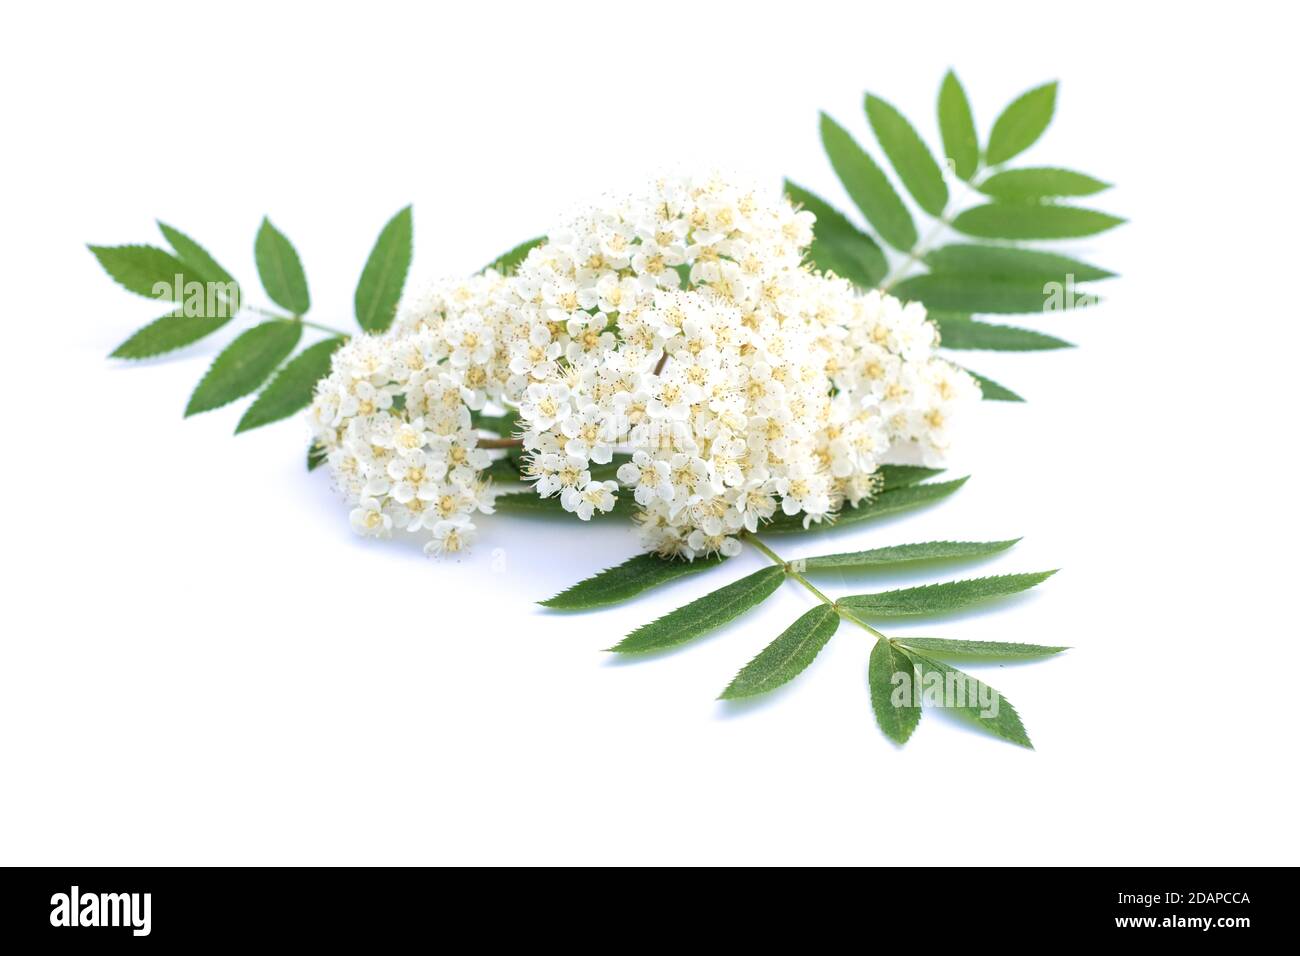 European rowan leaves mountain ash Cut Out Stock Images & Pictures - Alamy